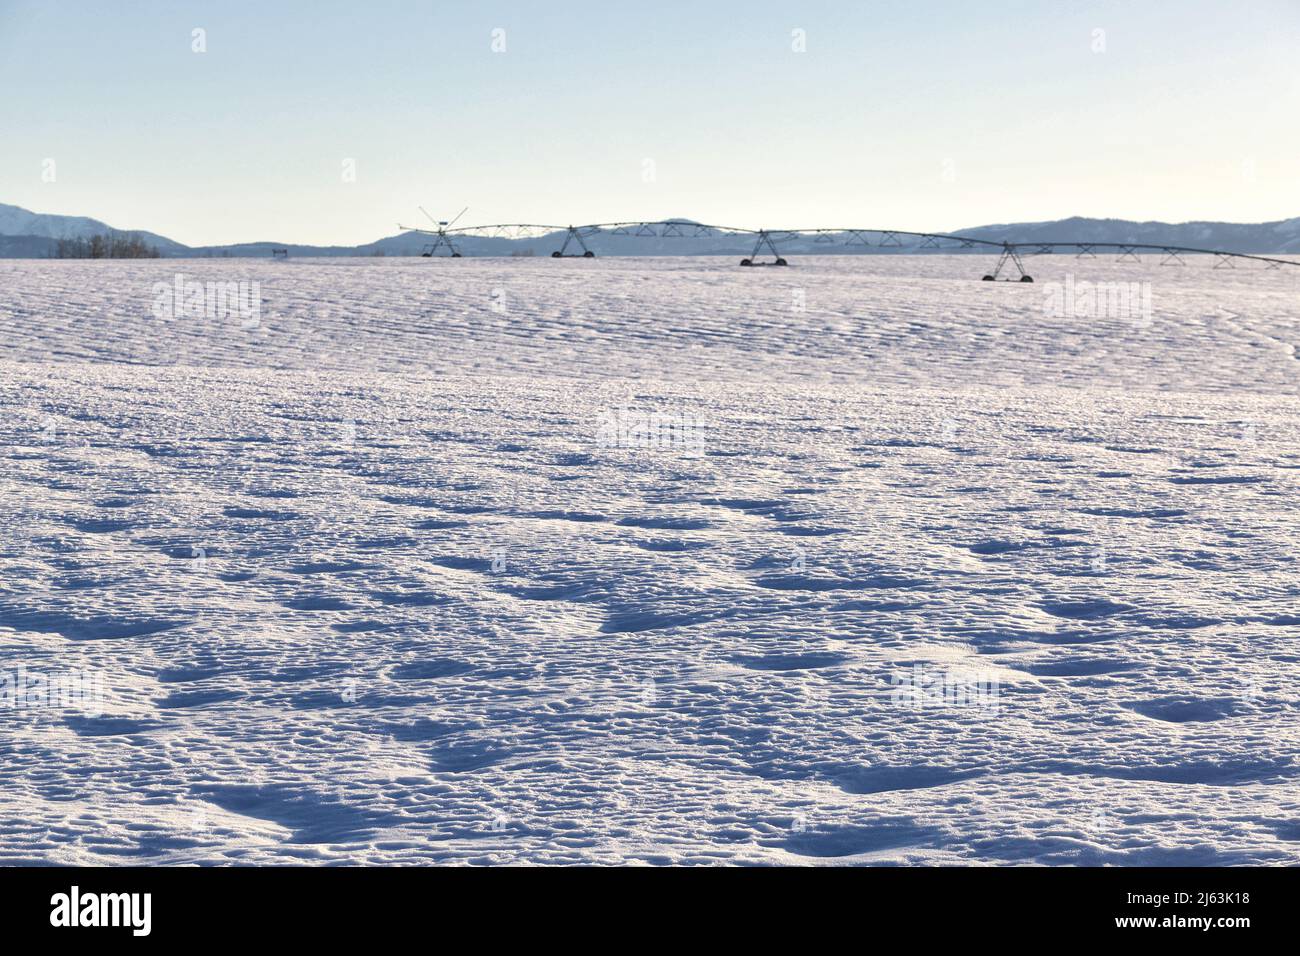 Snow patterns caused by the wind blowing across a farm field, with farming equipment out of focus in the background.  The snow will provide water for Stock Photo